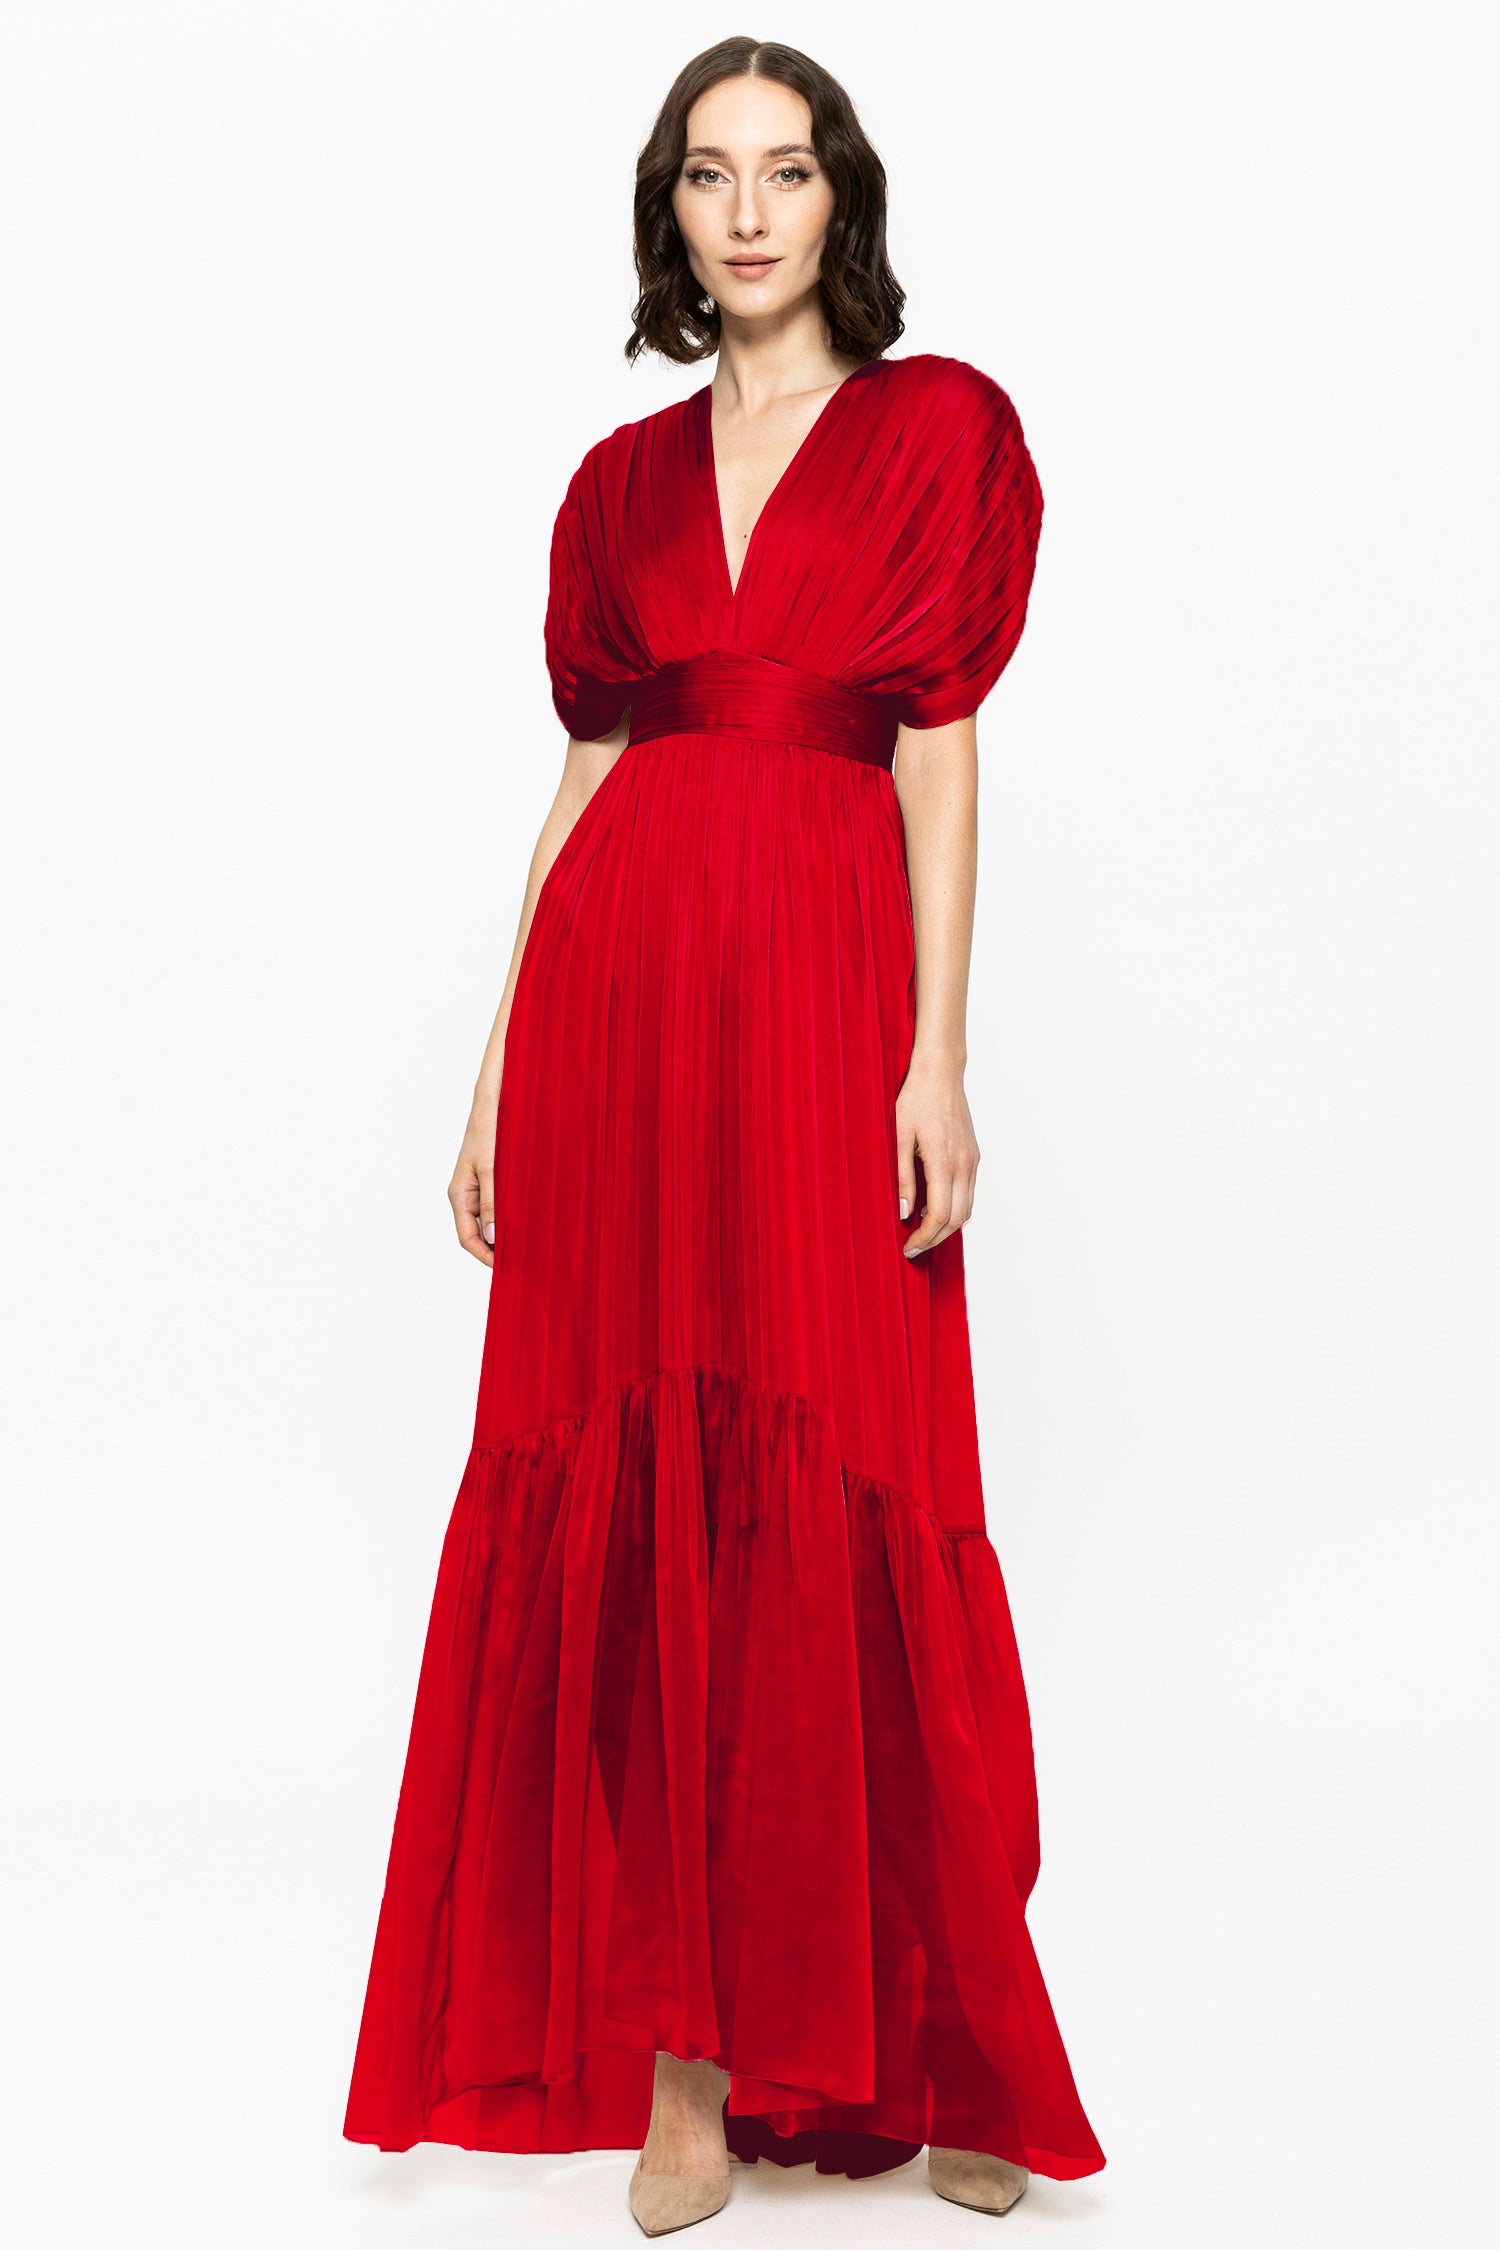 Lerena Chiffon Evening Gown Red